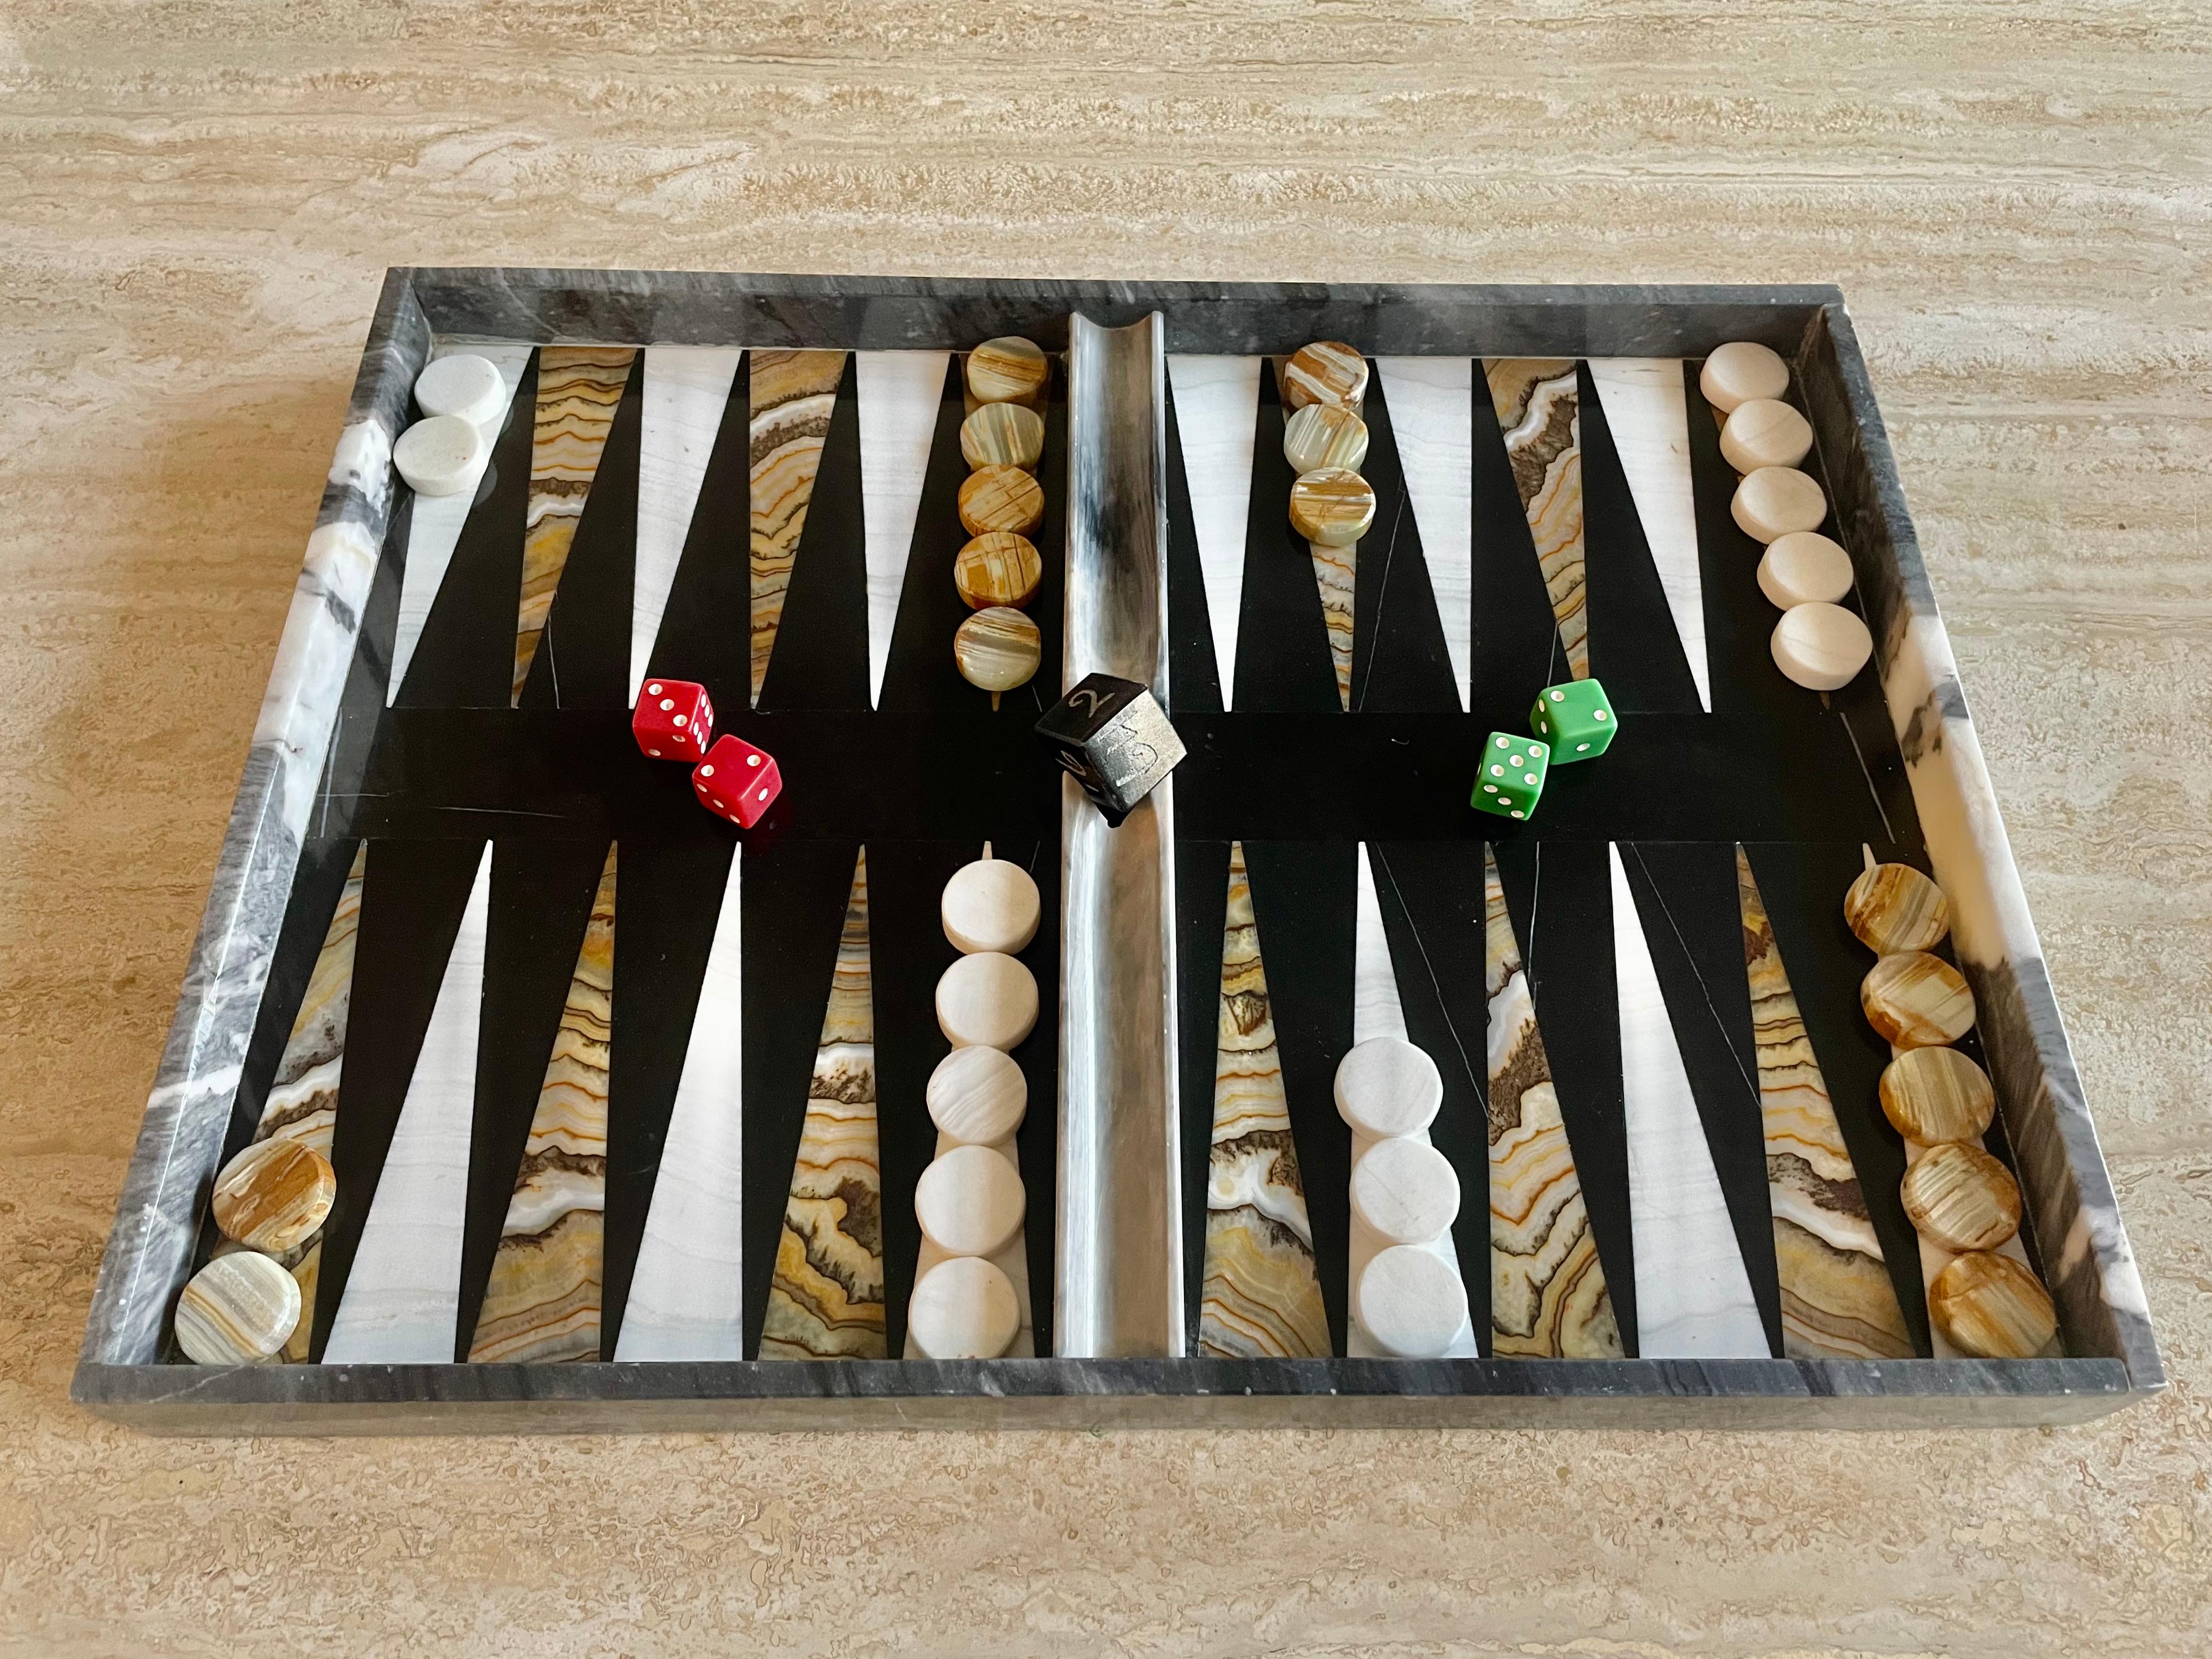 Midcentury marble backgammon board with game pieces and dice.